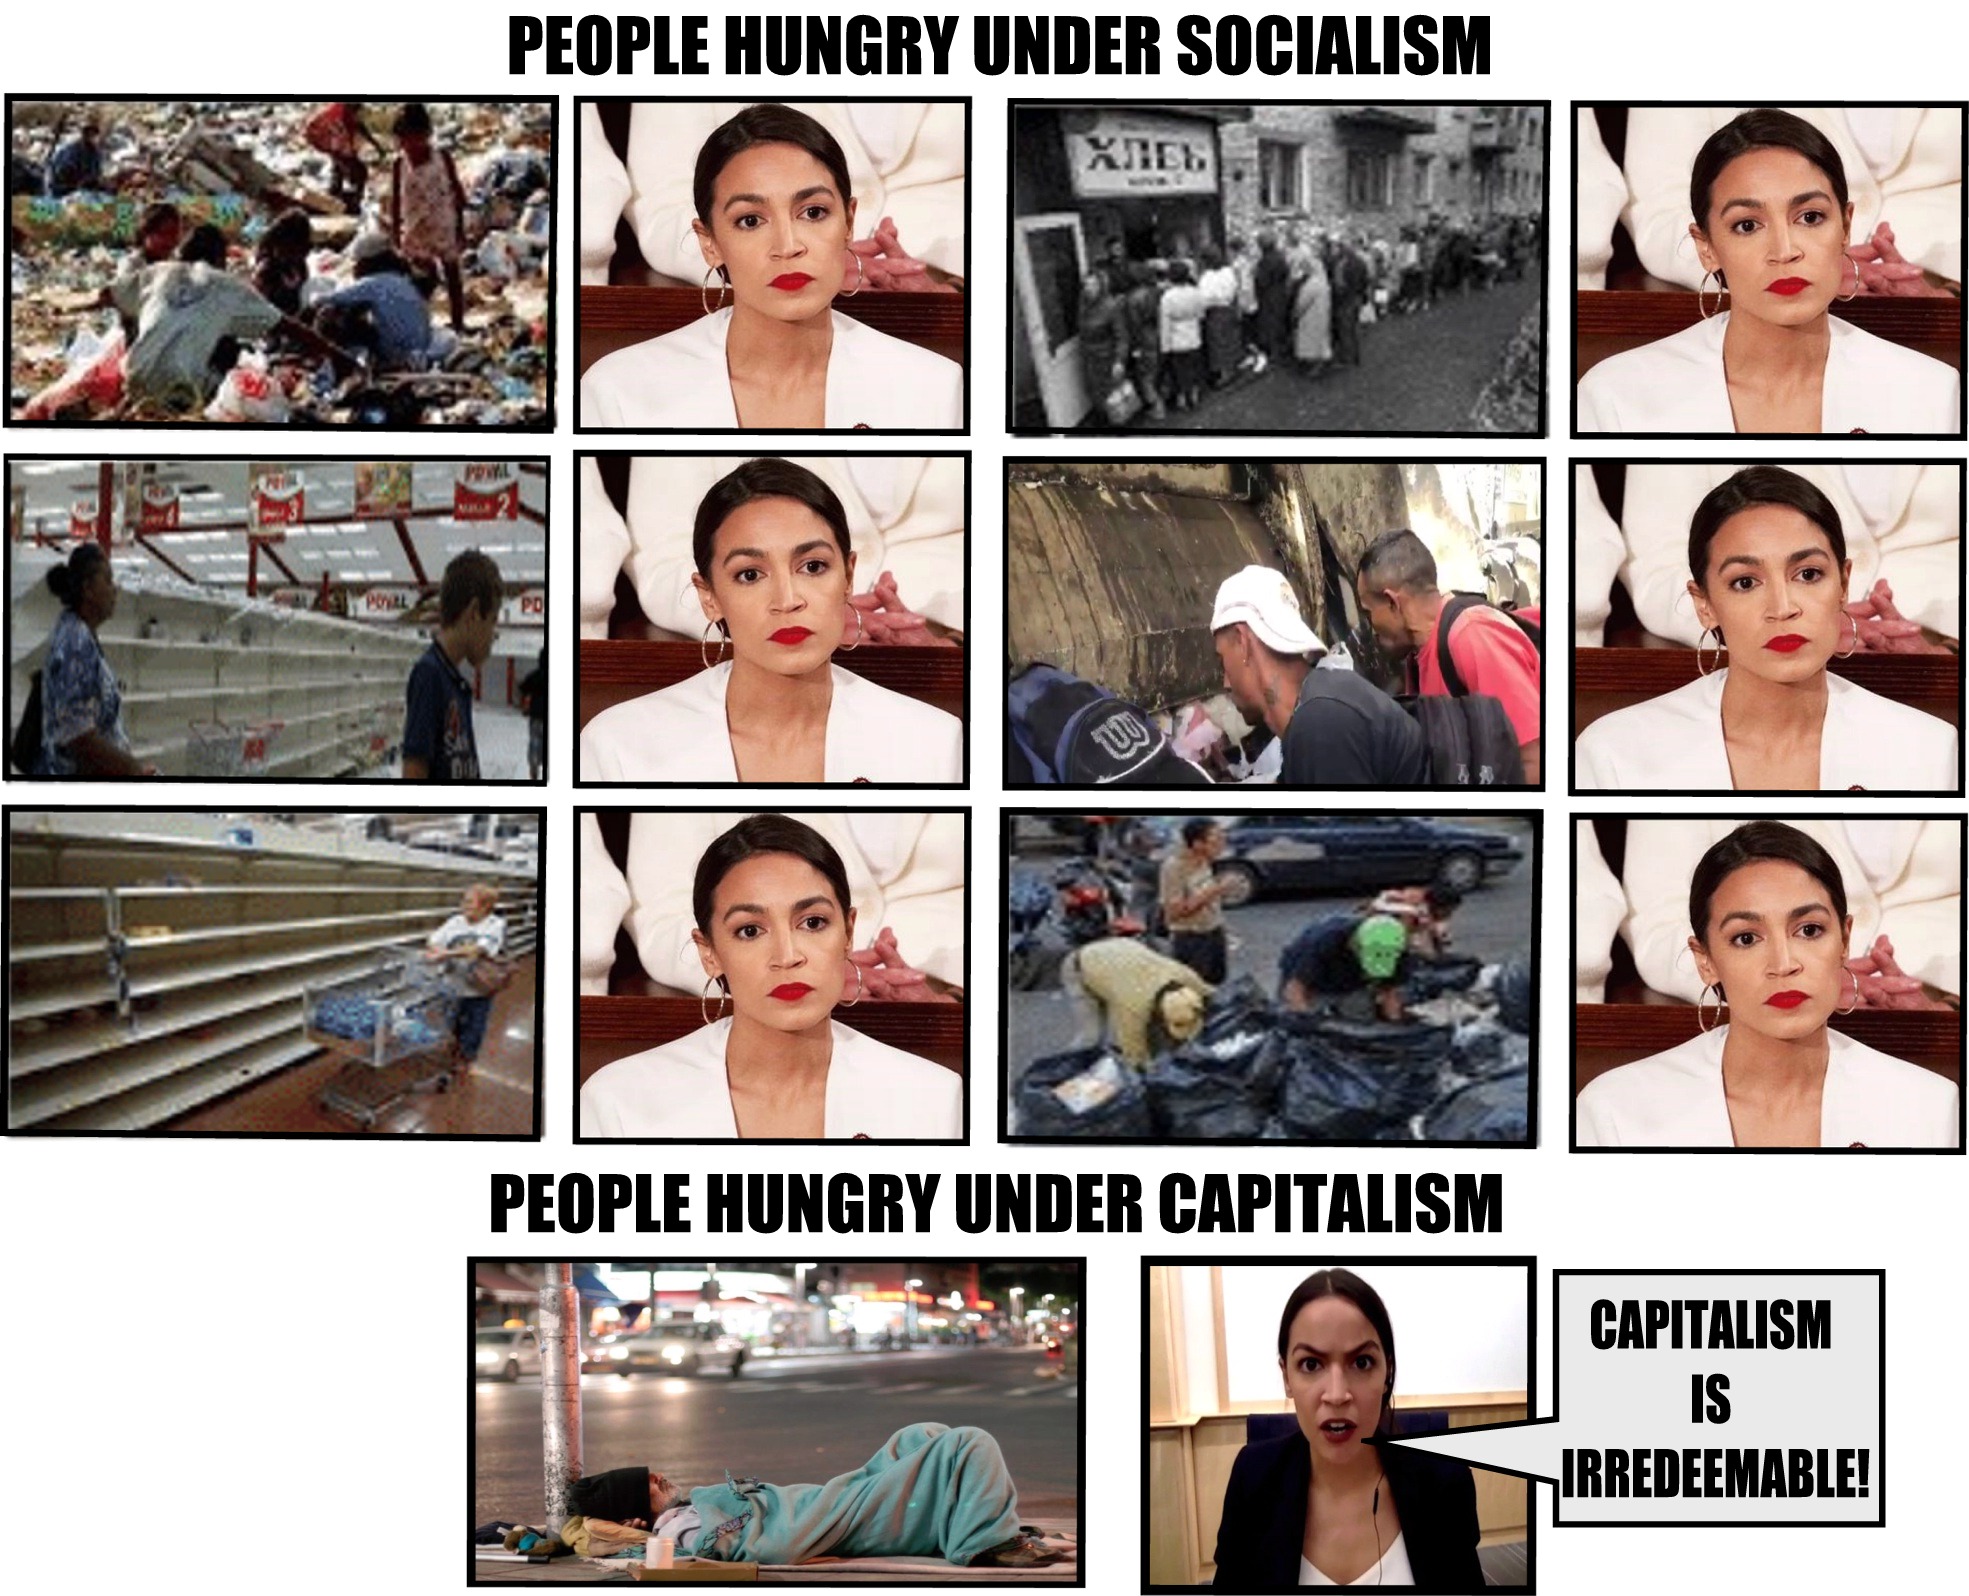 collage - People Hungry Under Socialism People Hungry Under Capitalism Capitalism Irredeemable!